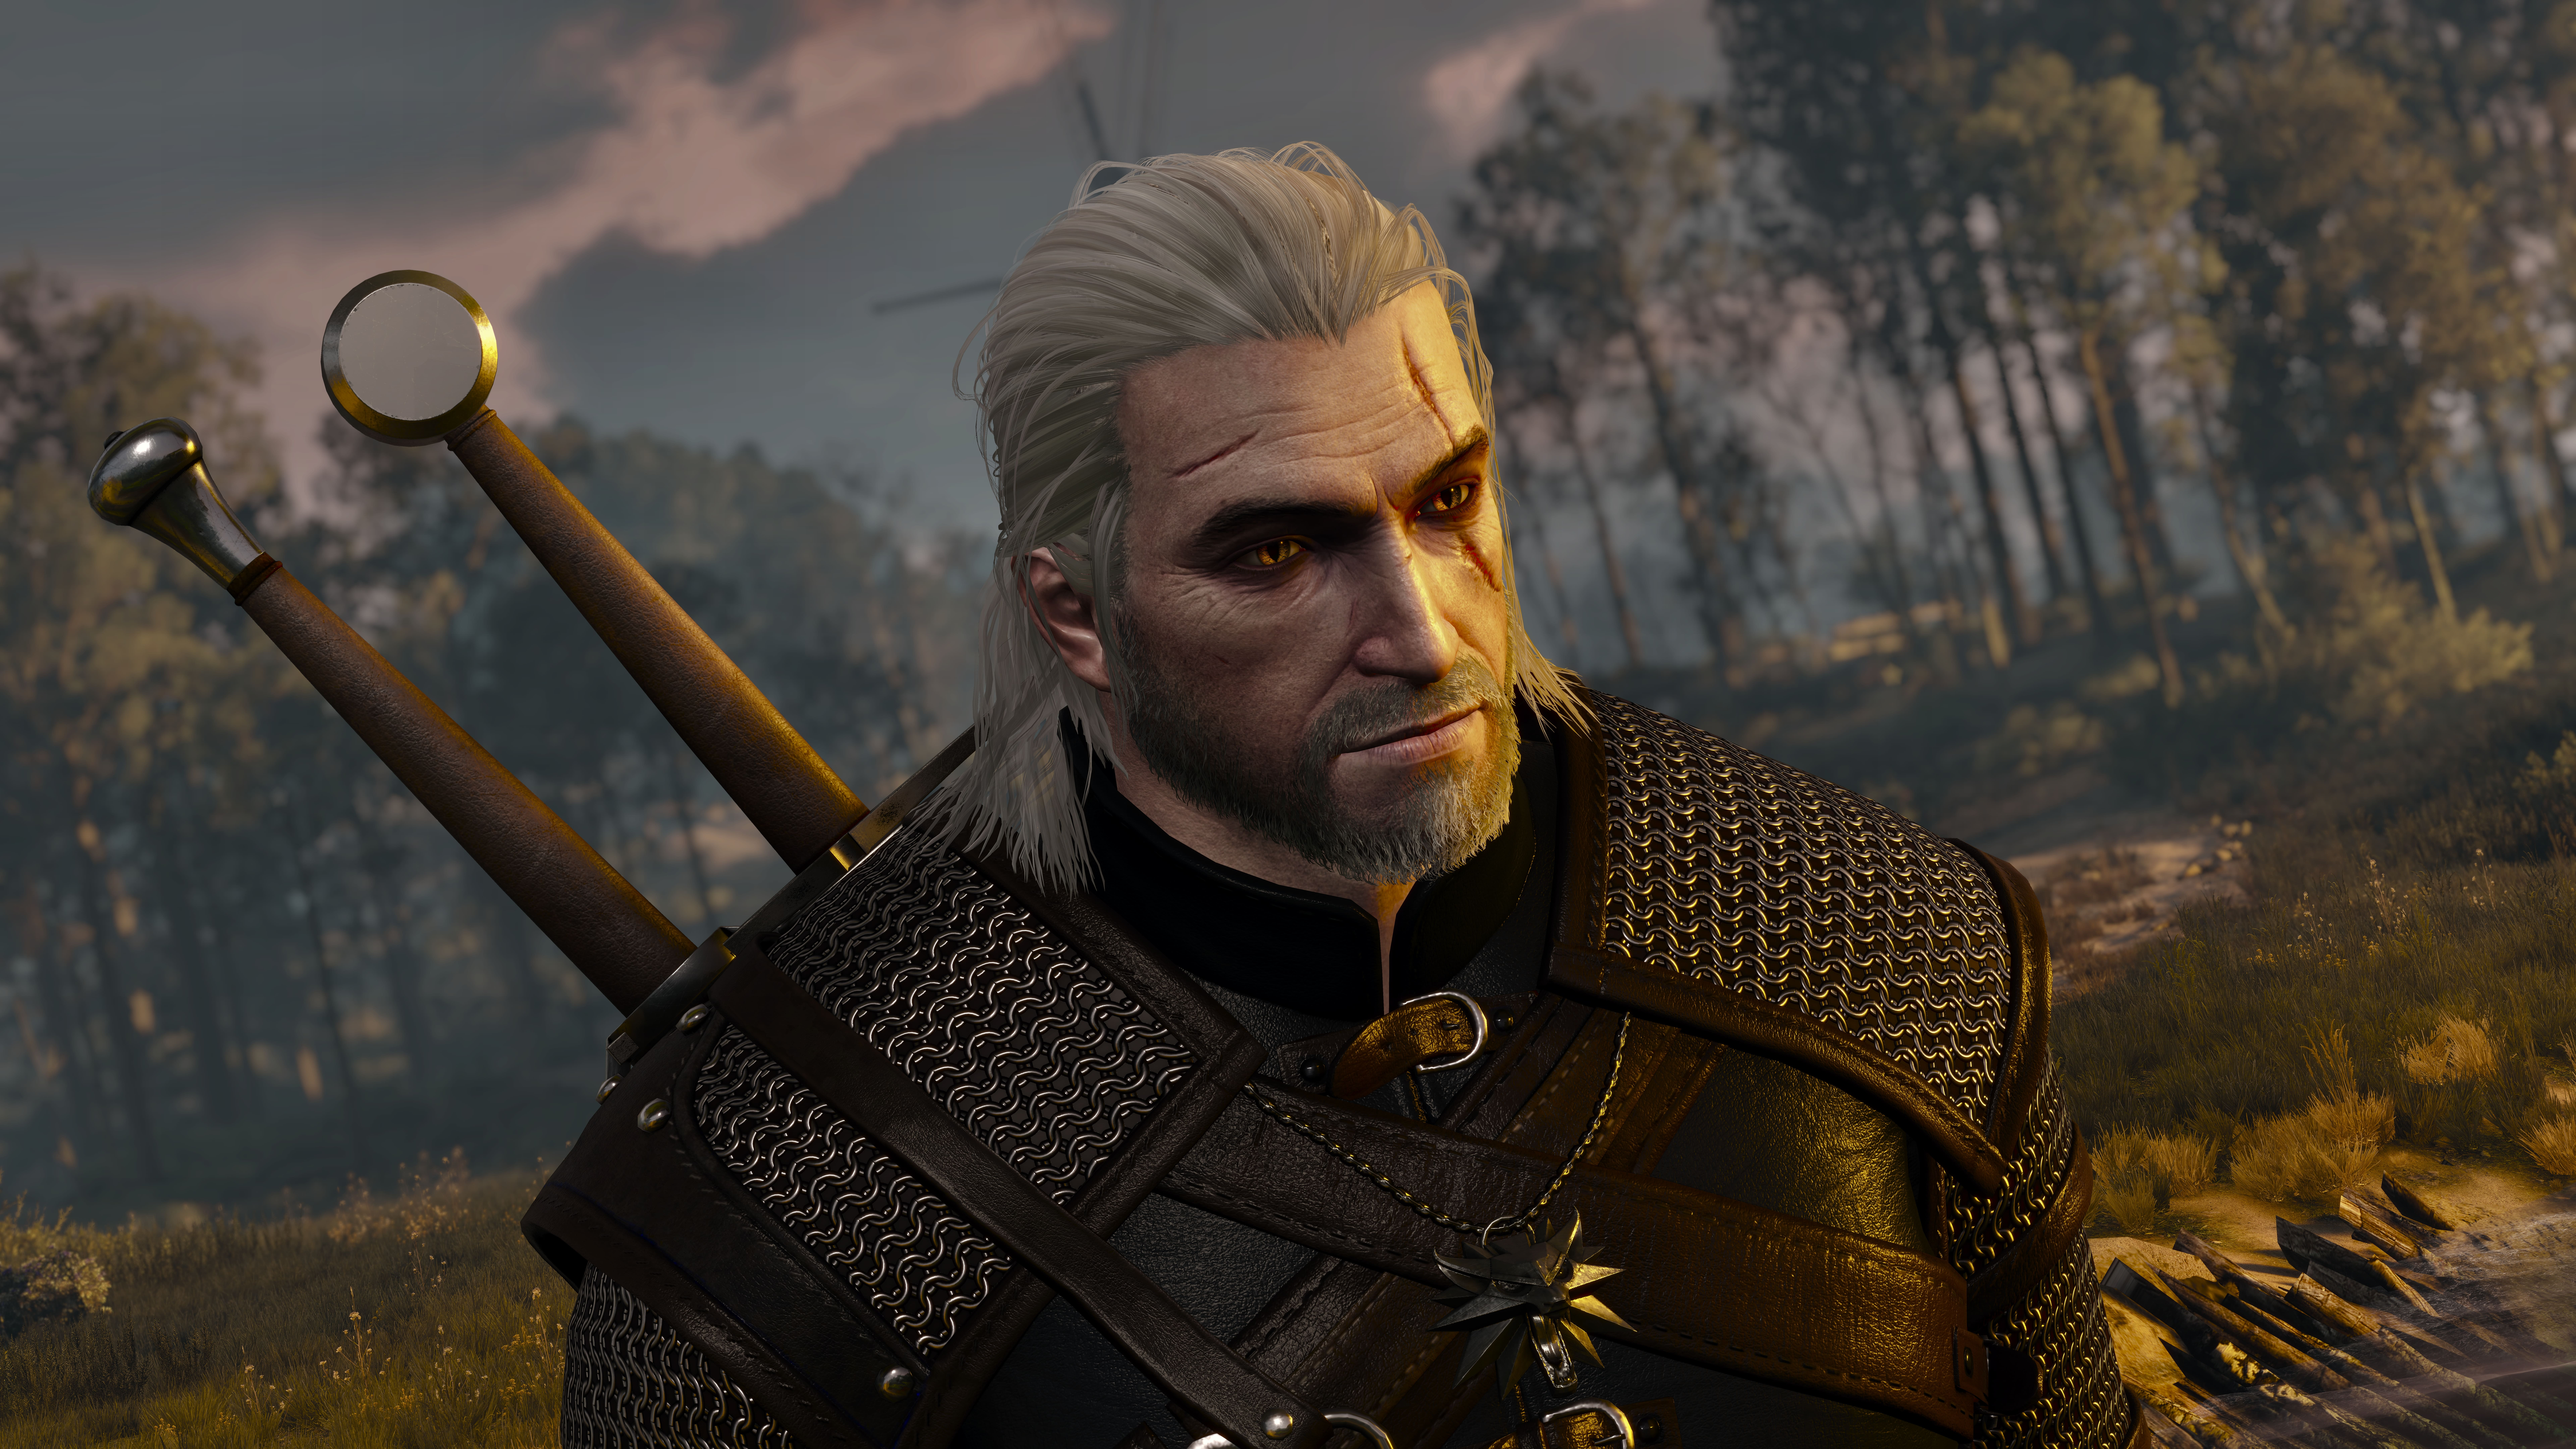 General 15360x8640 The Witcher 3: Wild Hunt screen shot The Witcher Geralt of Rivia video games video game characters